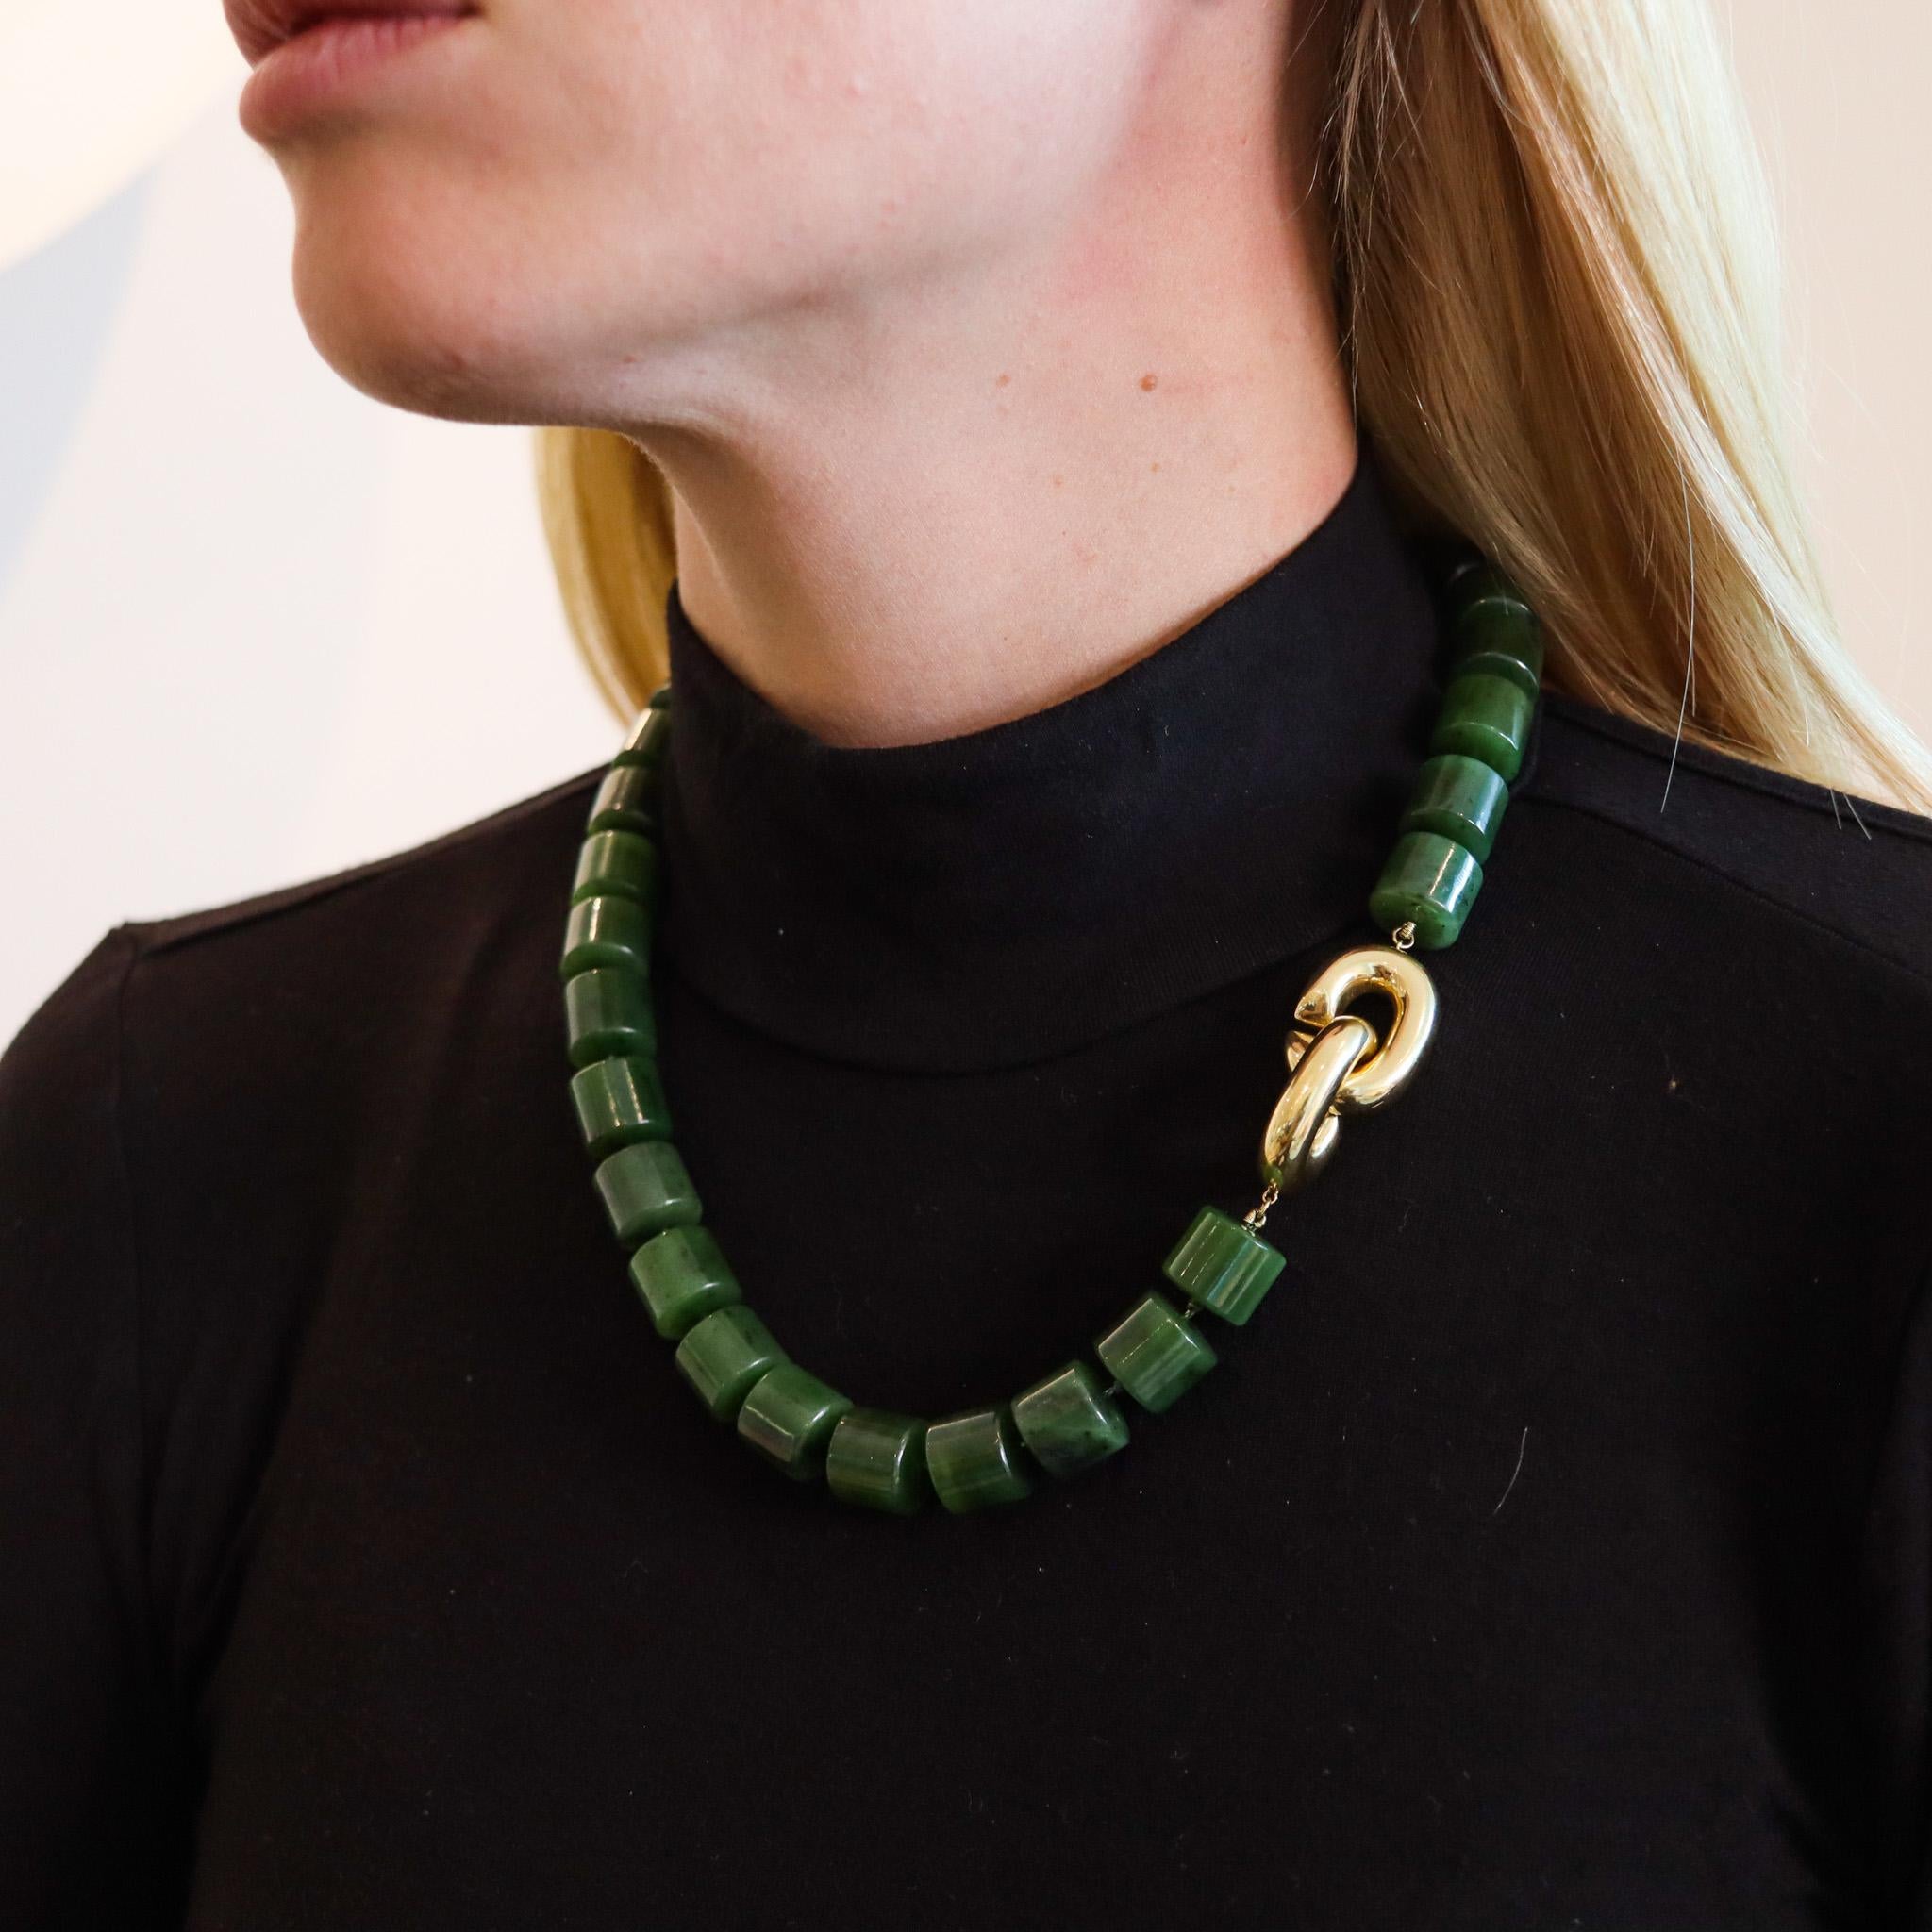 Angela Cummings 1993 Nephrite Green Jade Necklace with 18kt Yellow Gold Mounting In Excellent Condition For Sale In Miami, FL